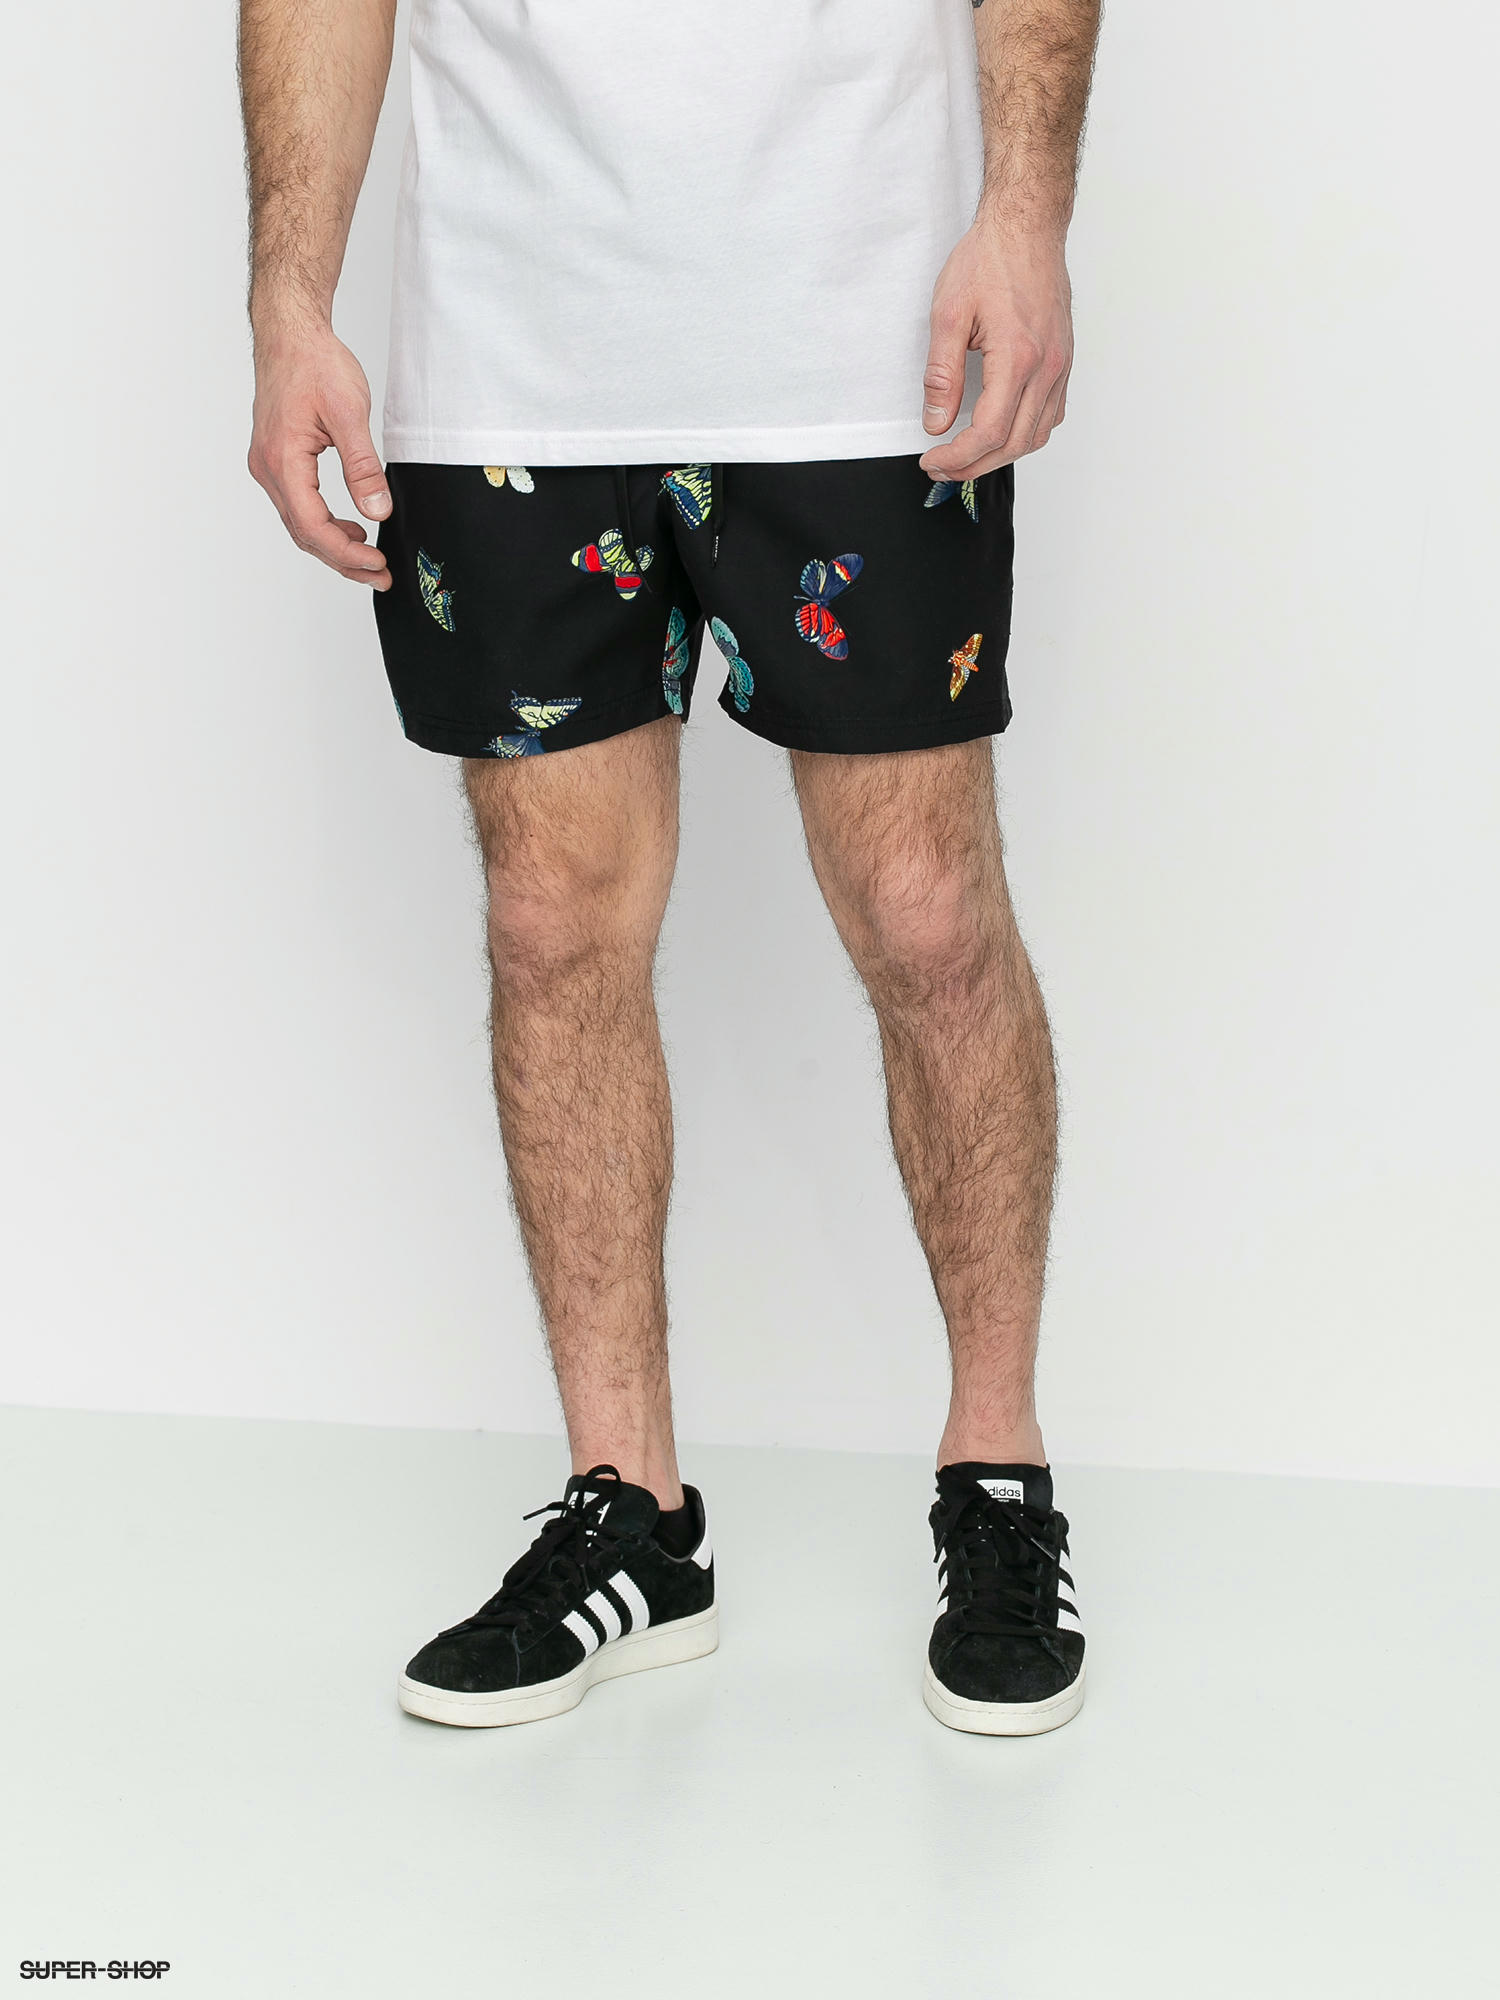 slip on vans with shorts